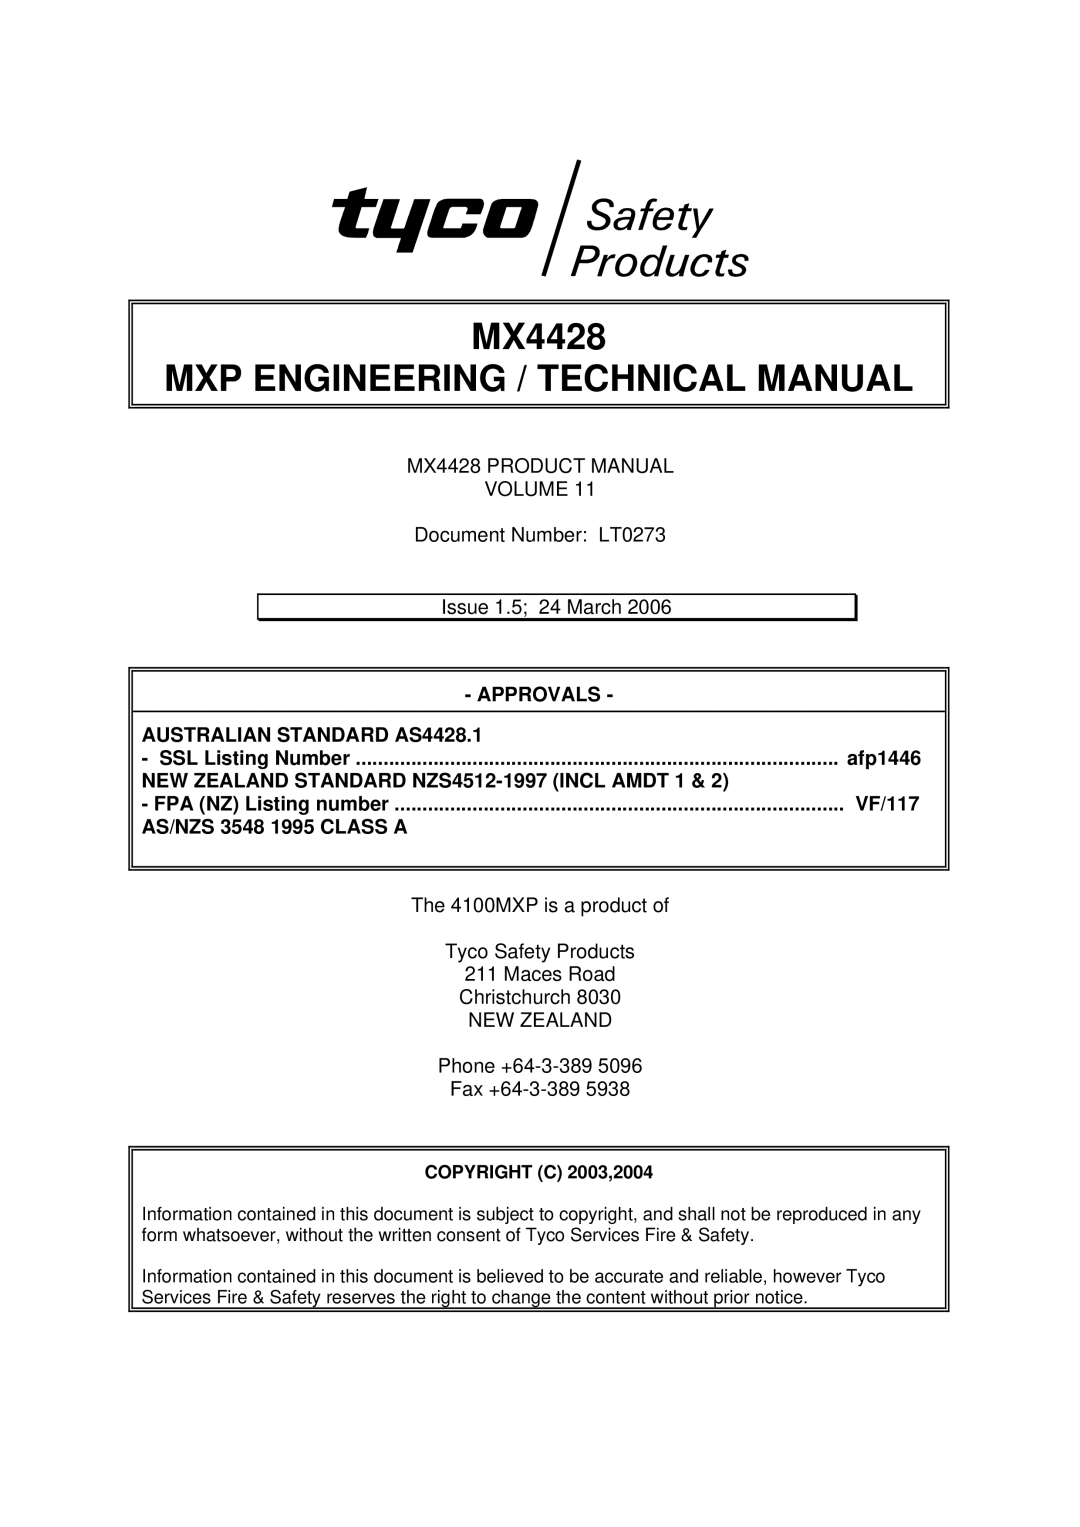 Tyco MX4428 technical manual Document Number LT0273 Issue 1.5 24 March, SSL Listing Number Afp1446, NEW Zealand 